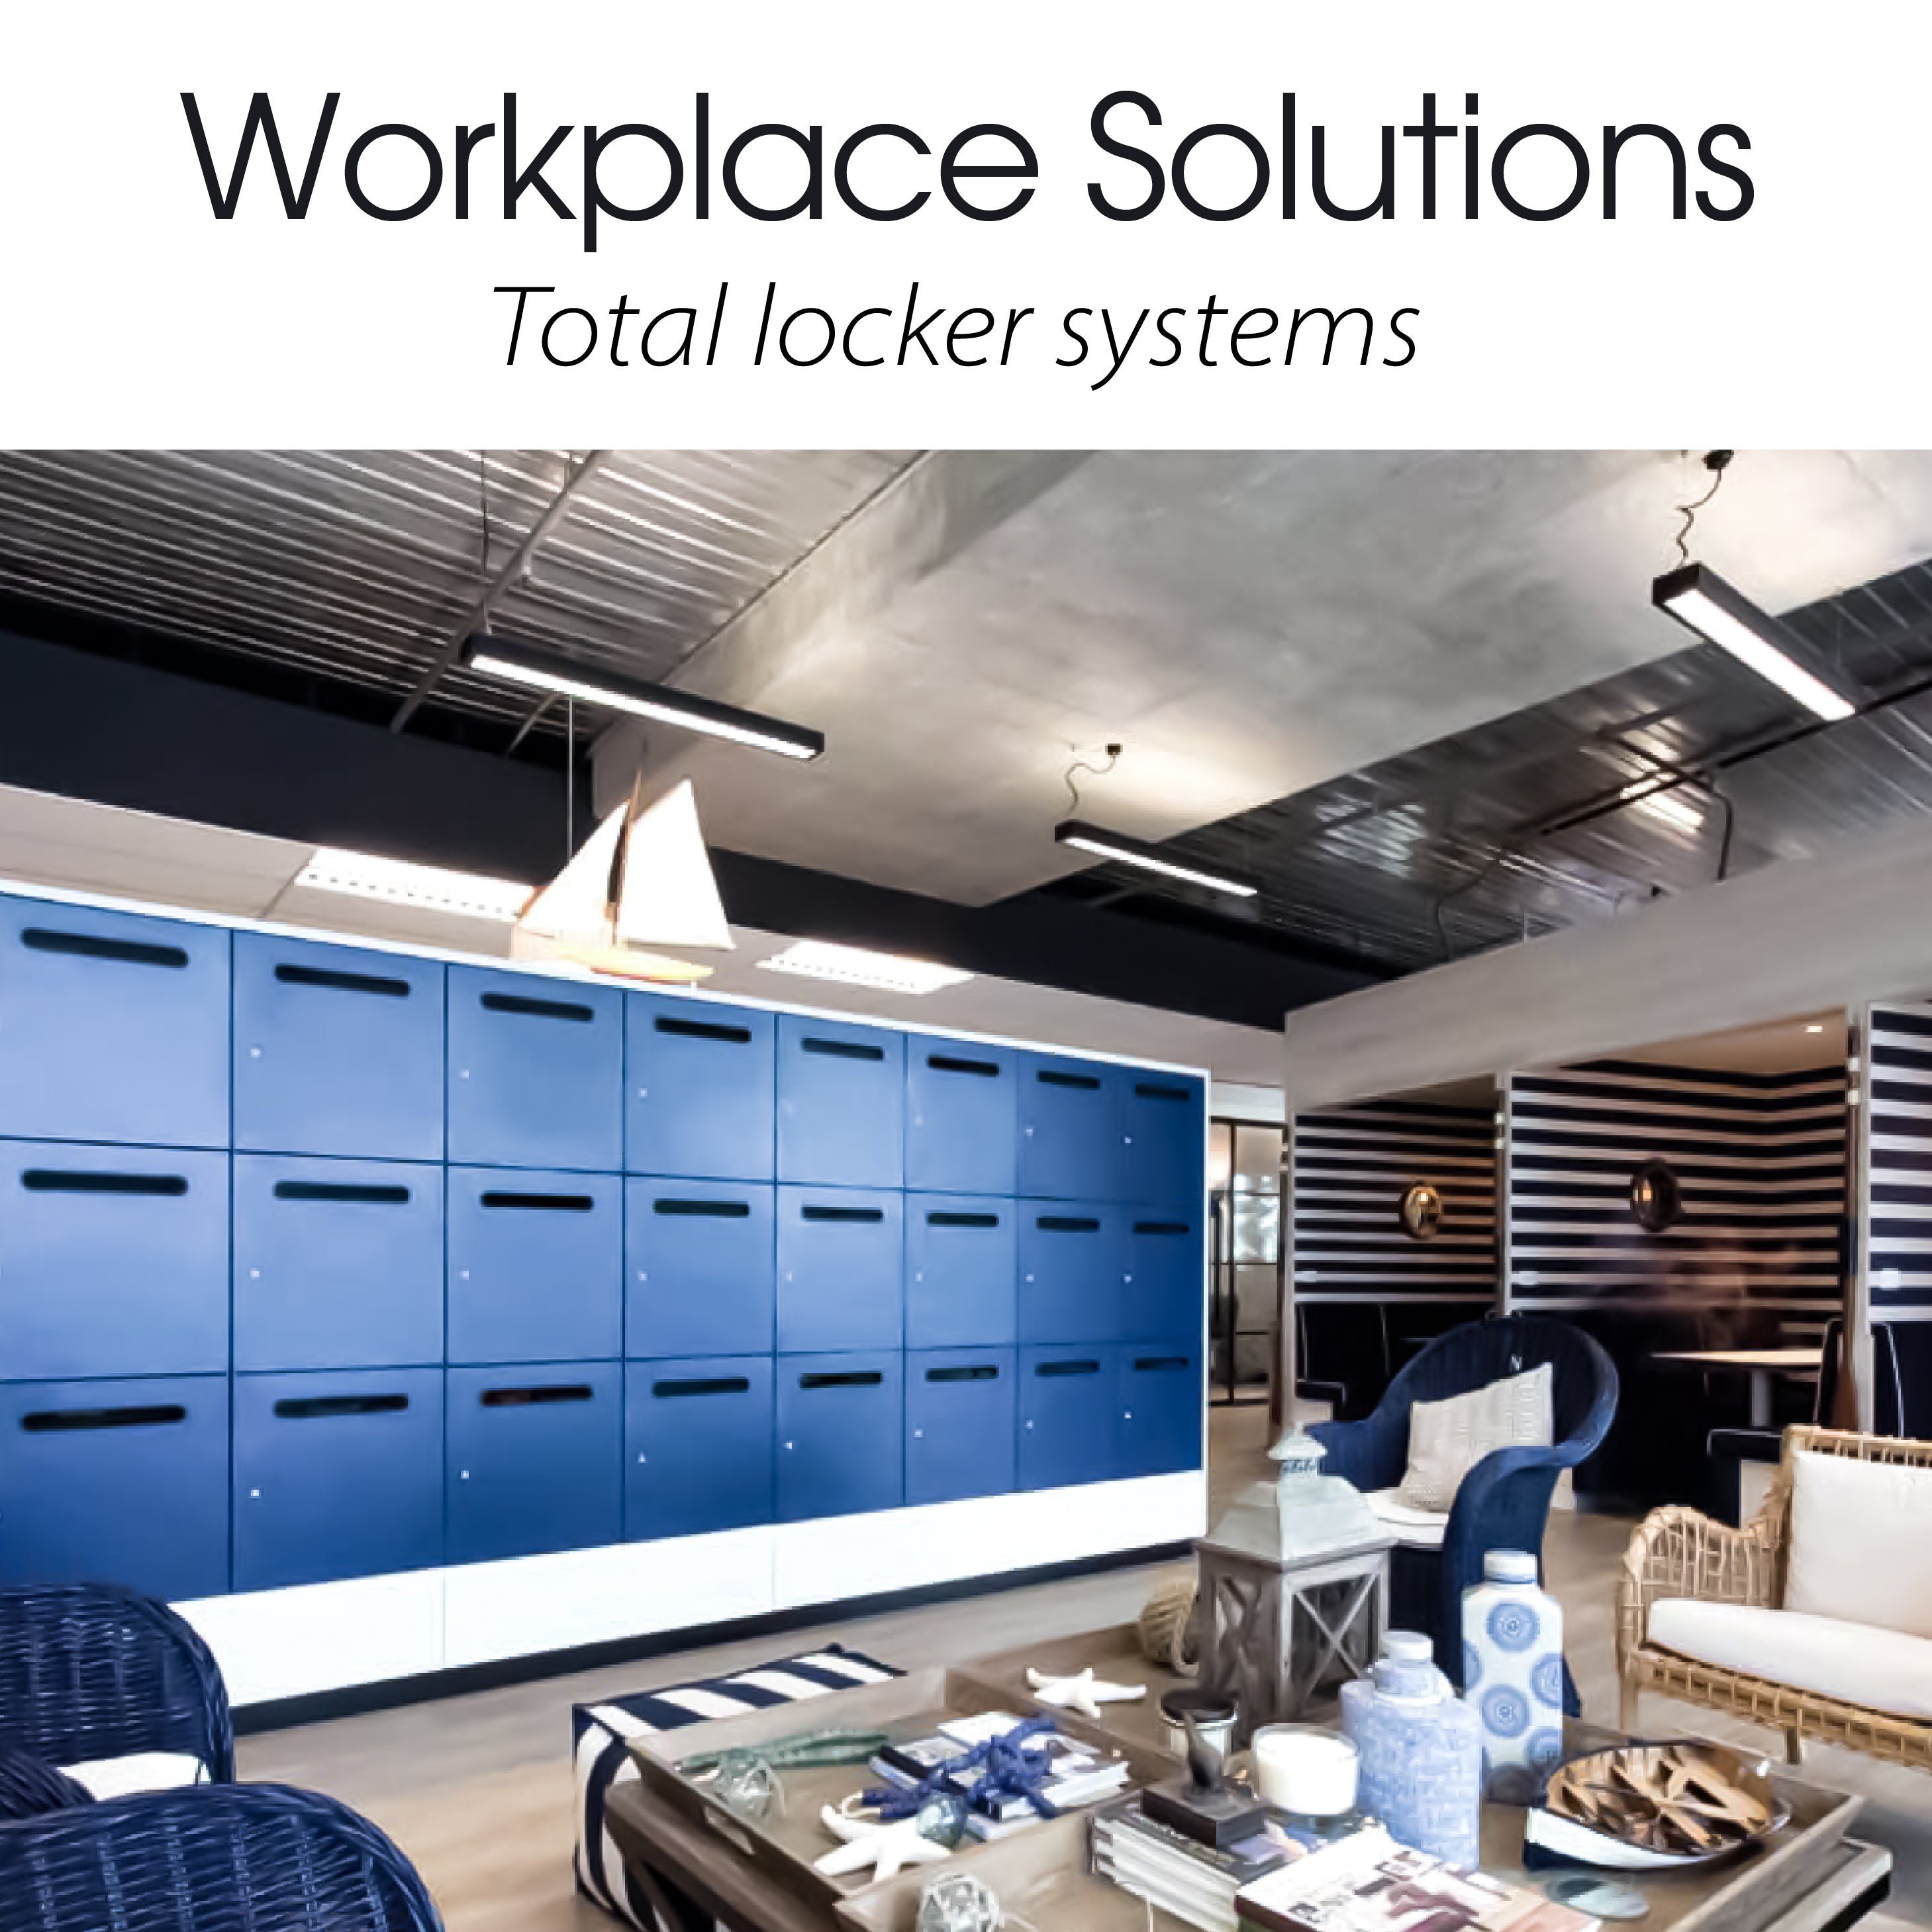 Workplace Solutions | Total locker systems